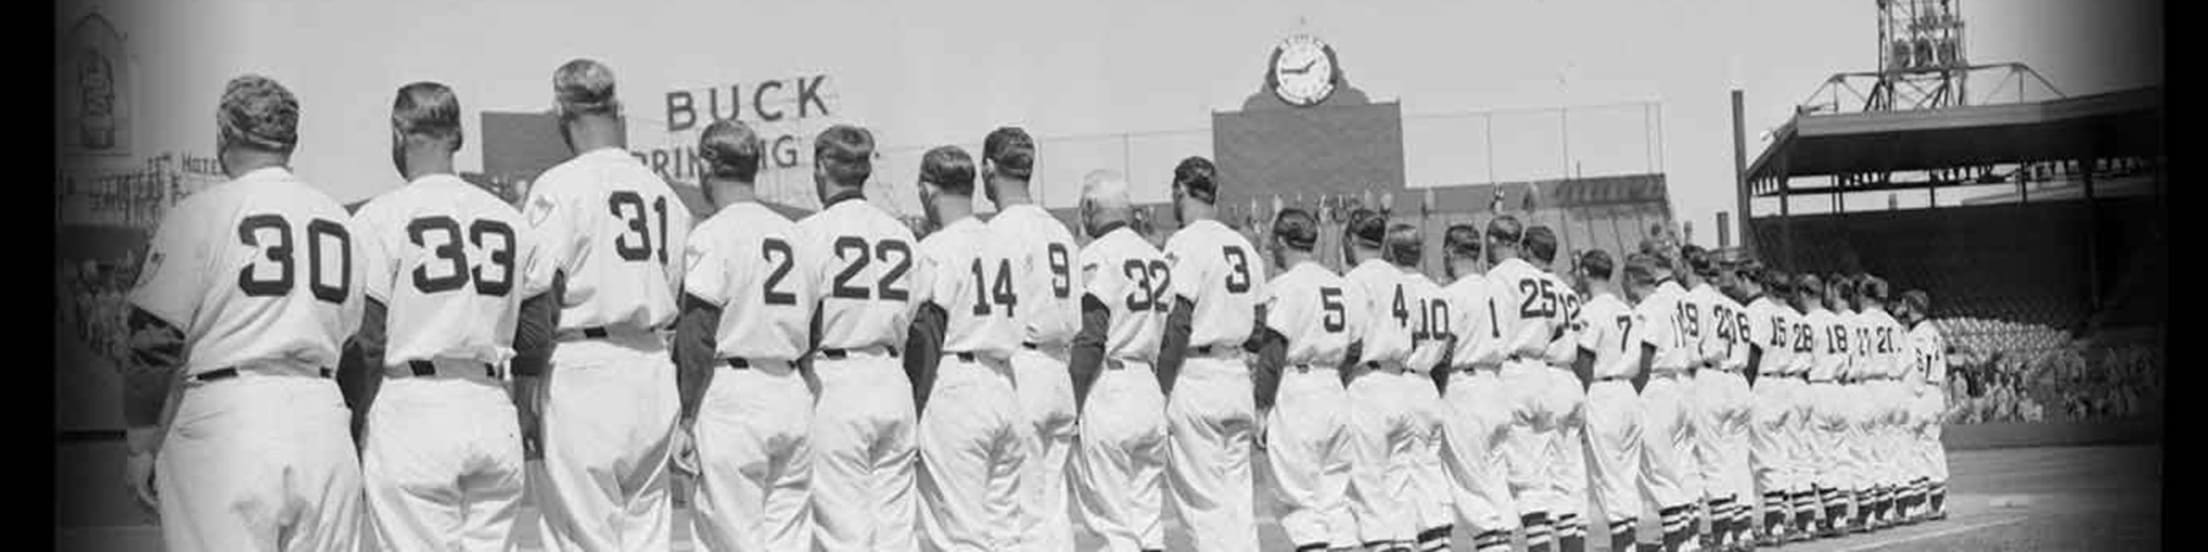 A team picture of the St. Louis Browns, Sept. 30, 1953, just